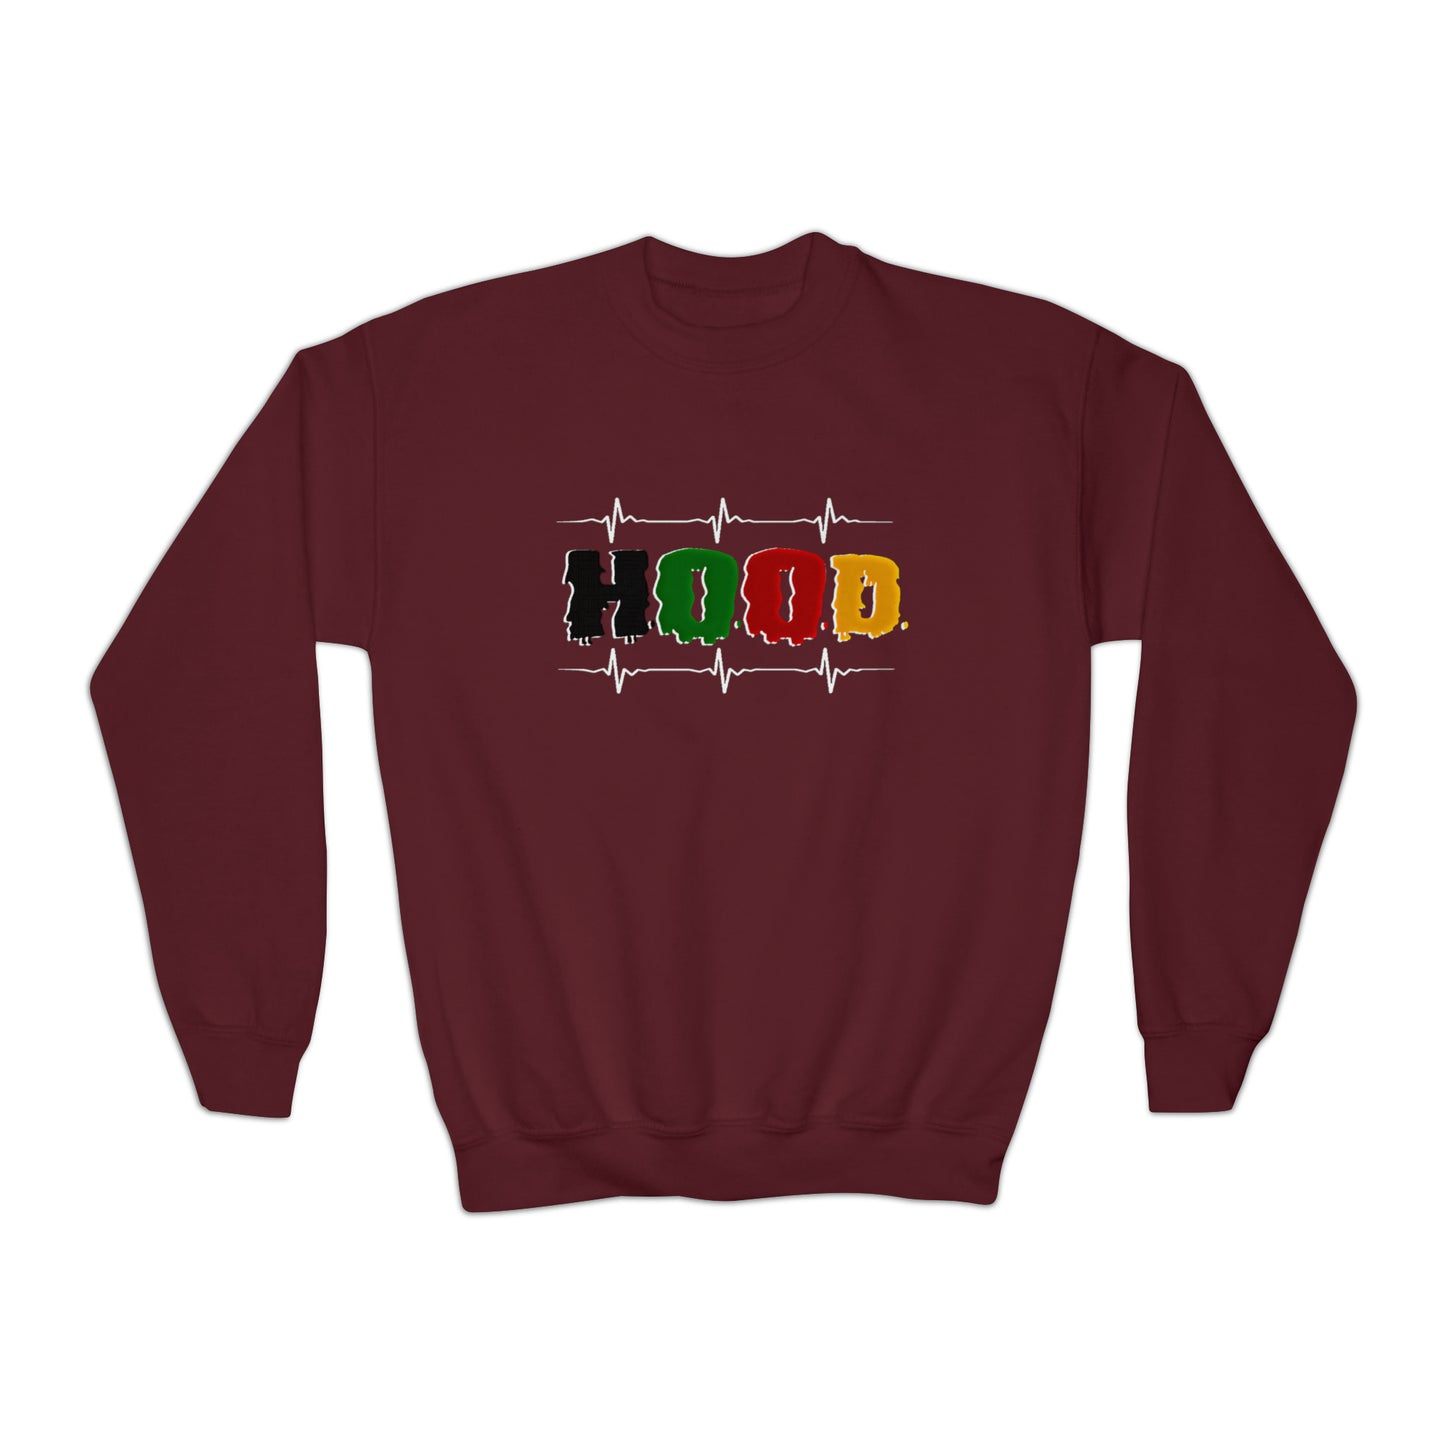 Kids Roots and Boots Sweatshirt